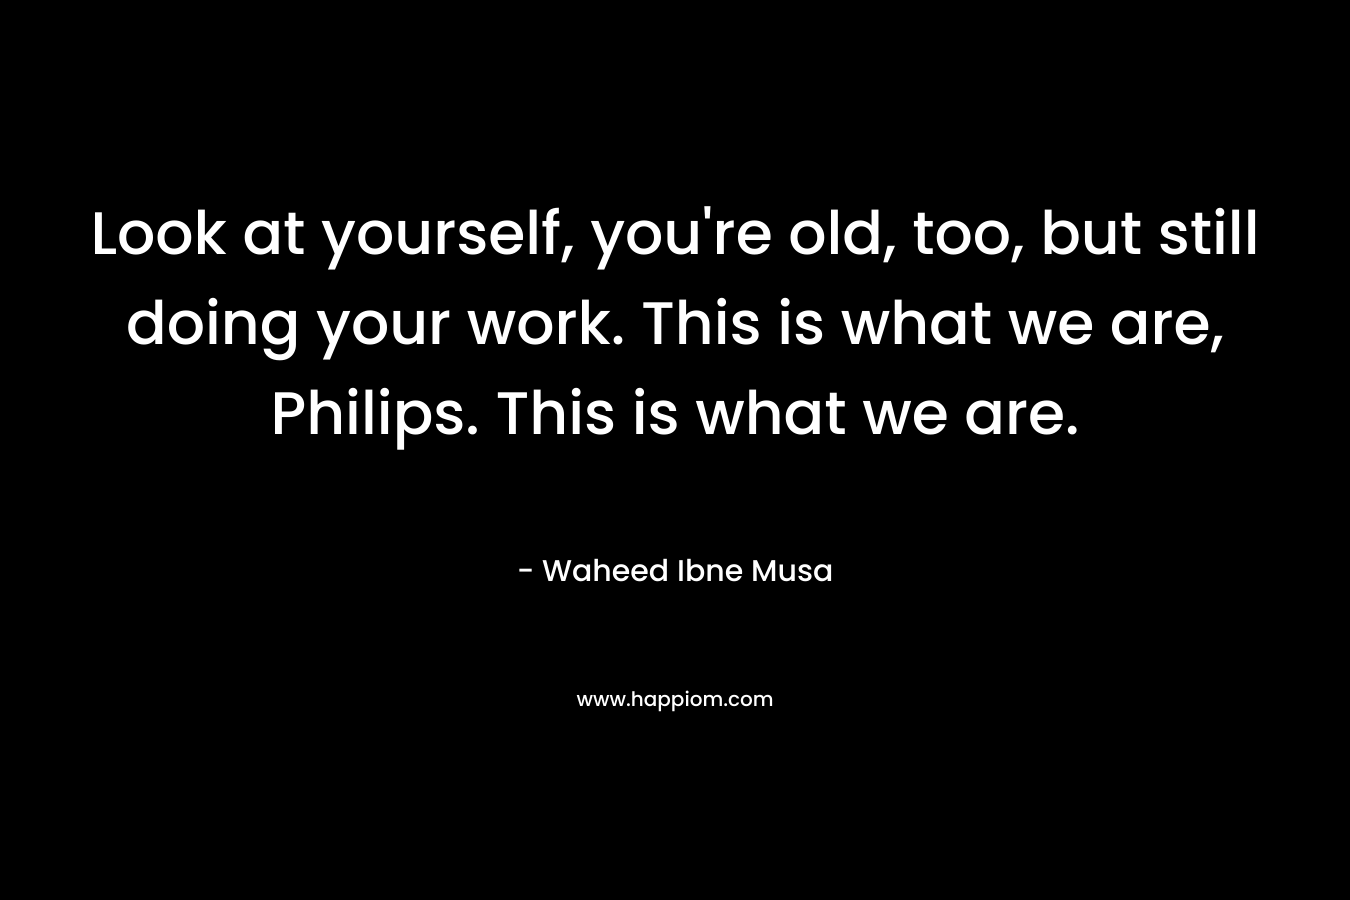 Look at yourself, you’re old, too, but still doing your work. This is what we are, Philips. This is what we are. – Waheed Ibne Musa